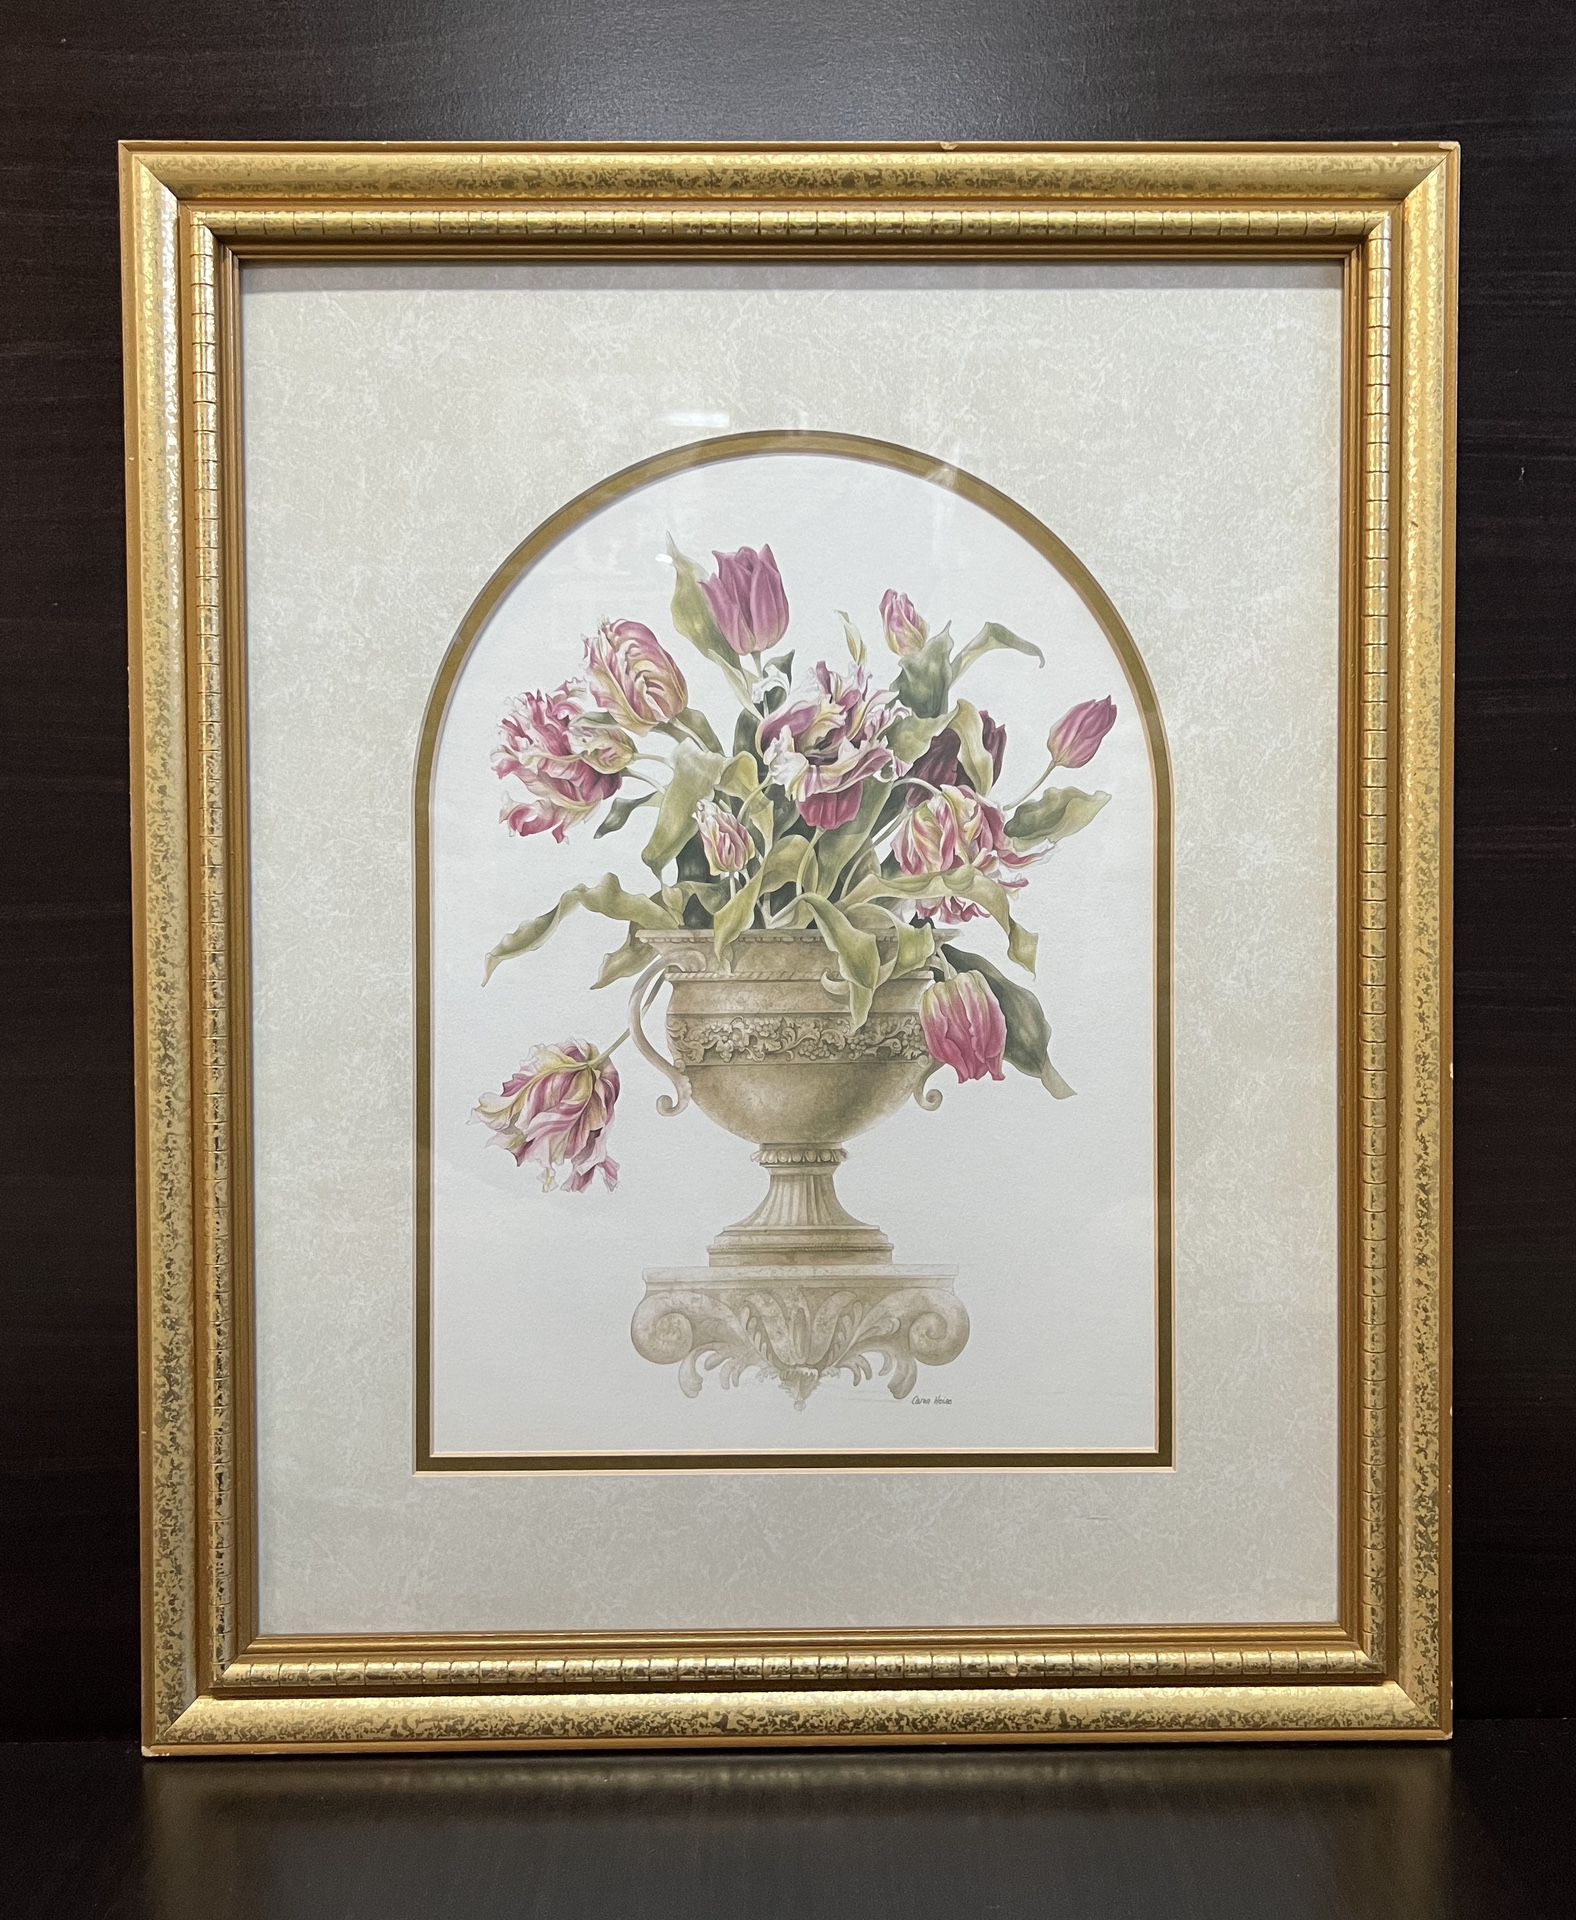 30% Off SALE Reproduction of Picture Art Flower by Heine, Framed, Double matted with an arch-shaped opening 